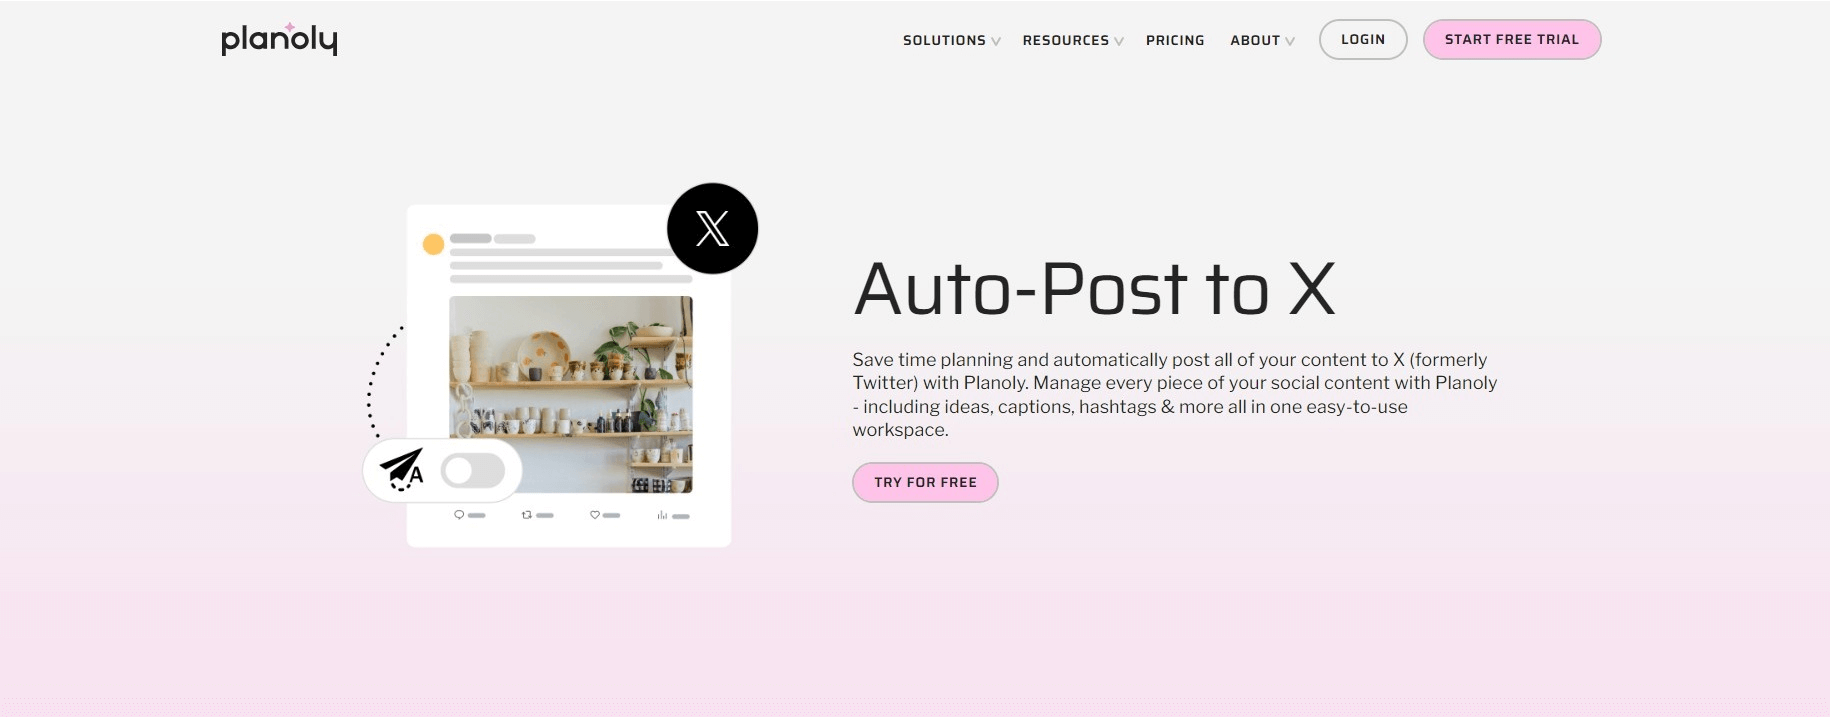 Planloly's landing page for auto posting to X